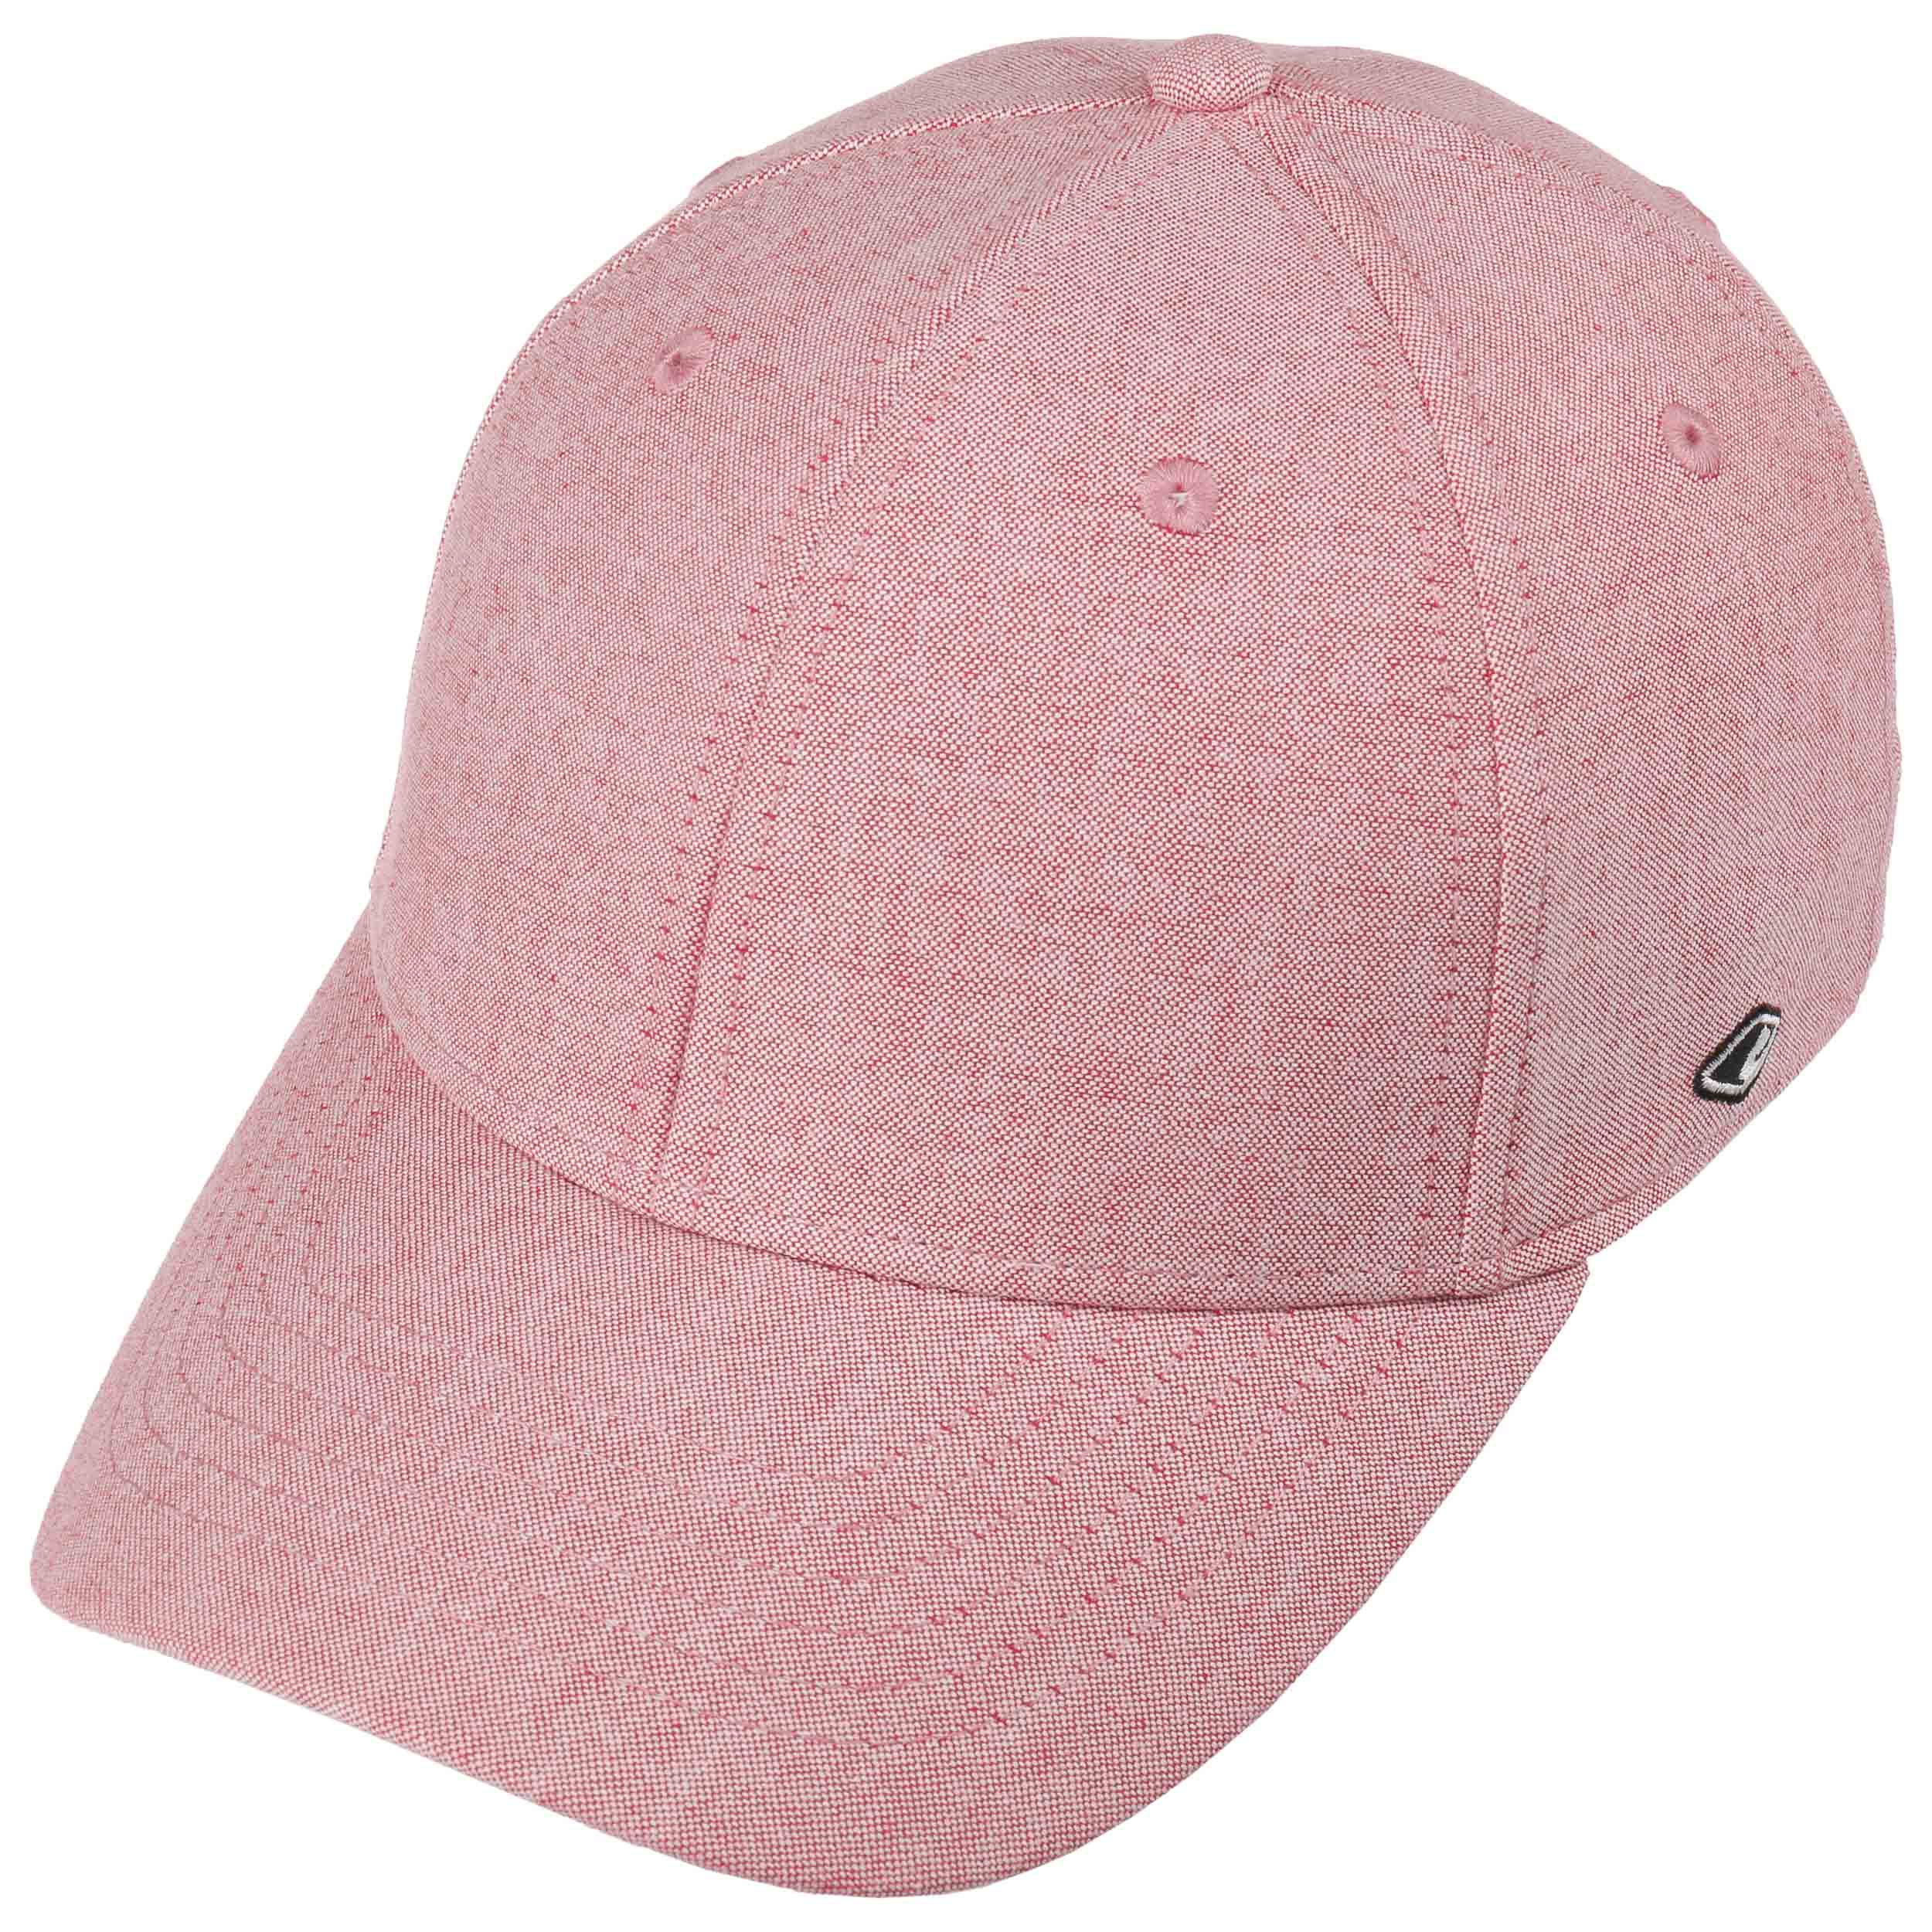 Teran Cap by Chillouts - 19,95 €